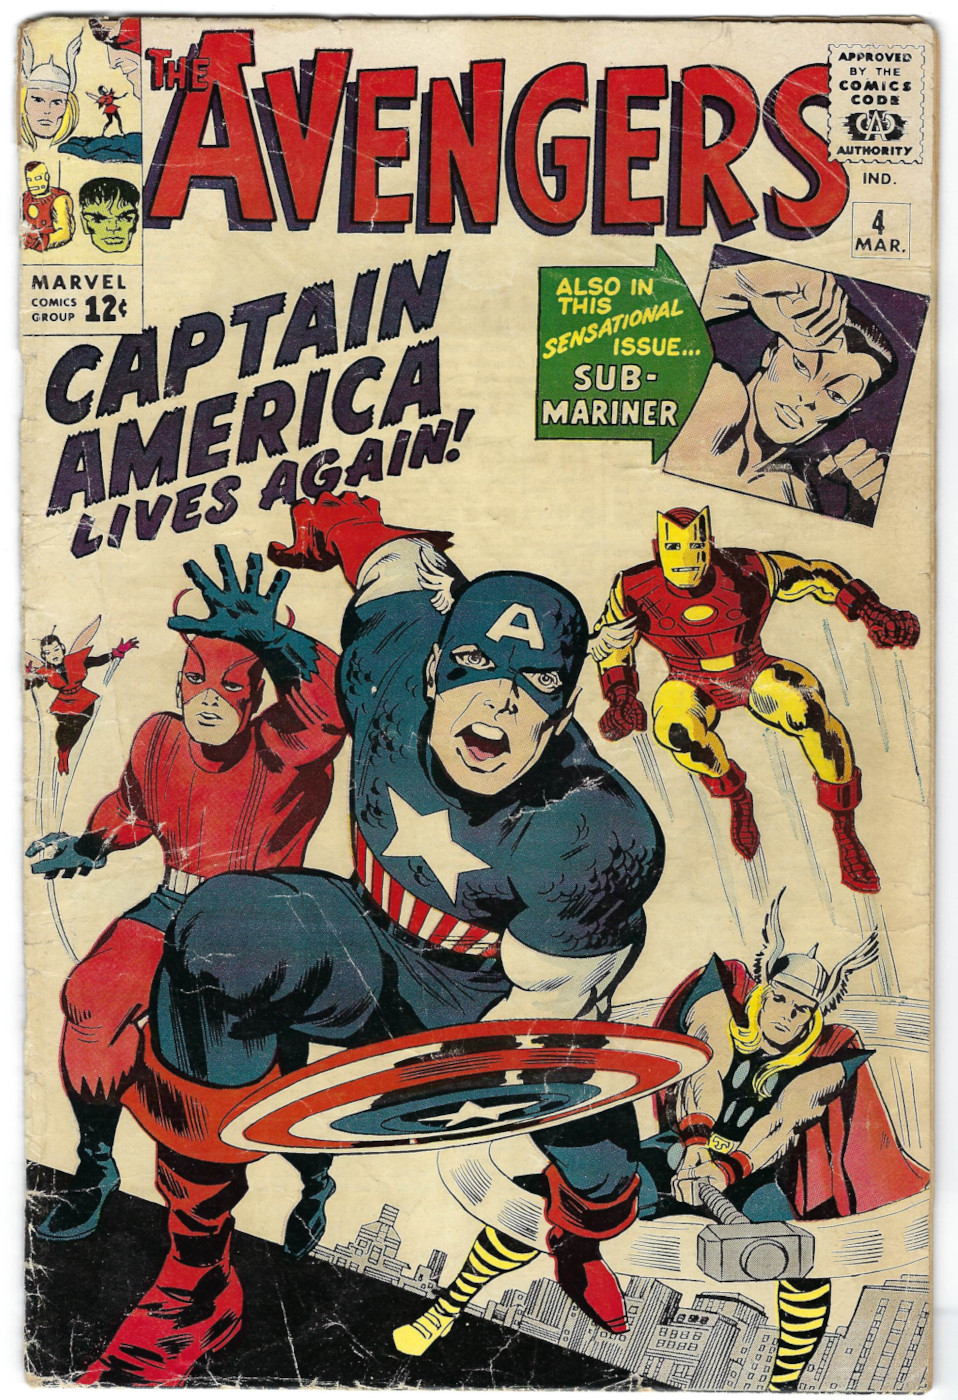 Marvel Comics Avengers (1963) #4: 1st Silver Age Appearance of Captain America